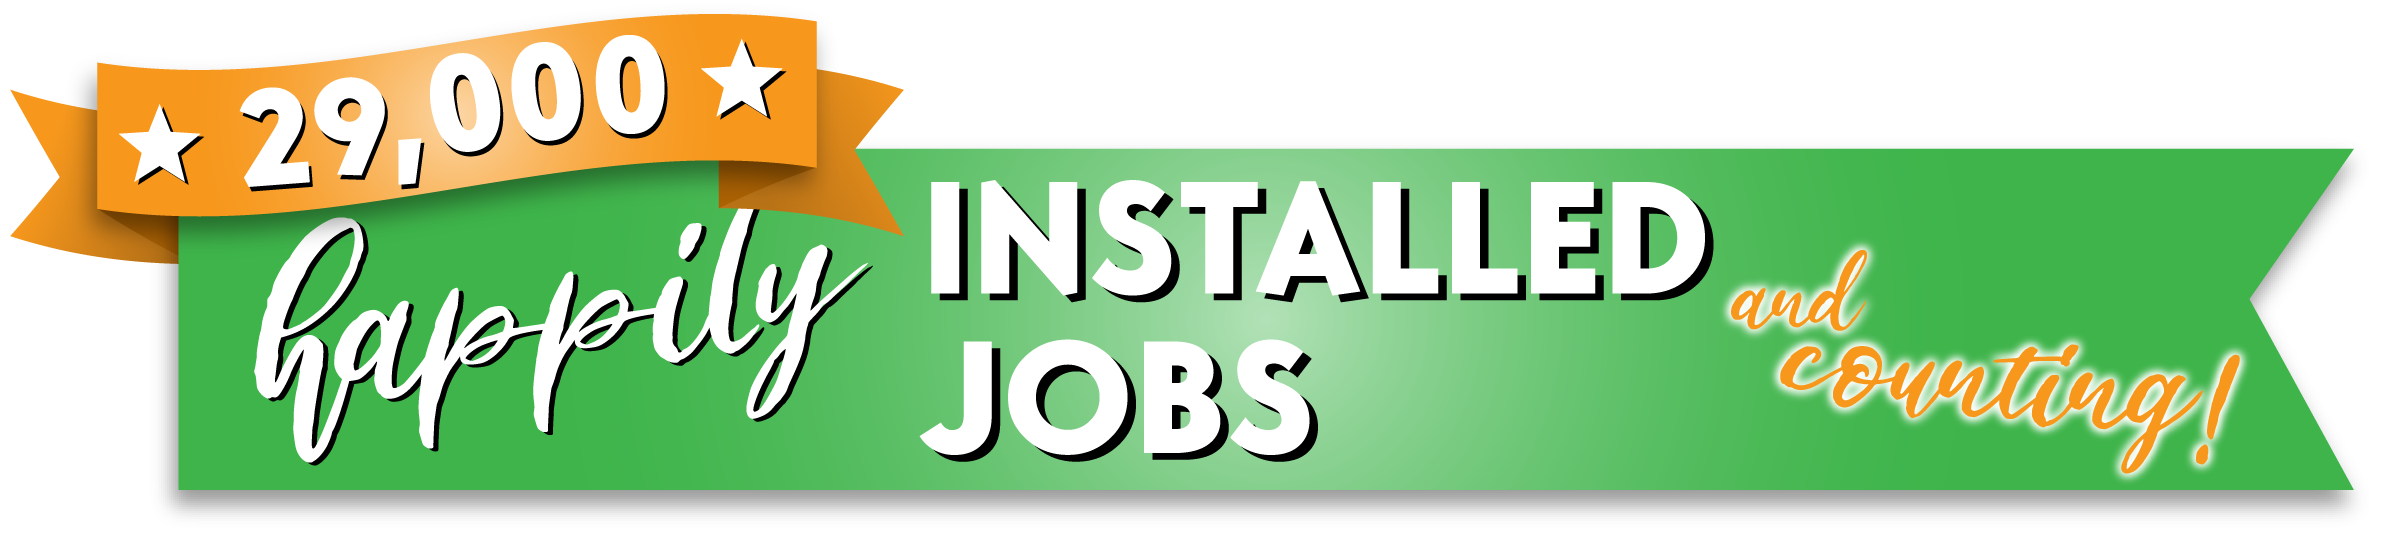 Happily Installled Jobs